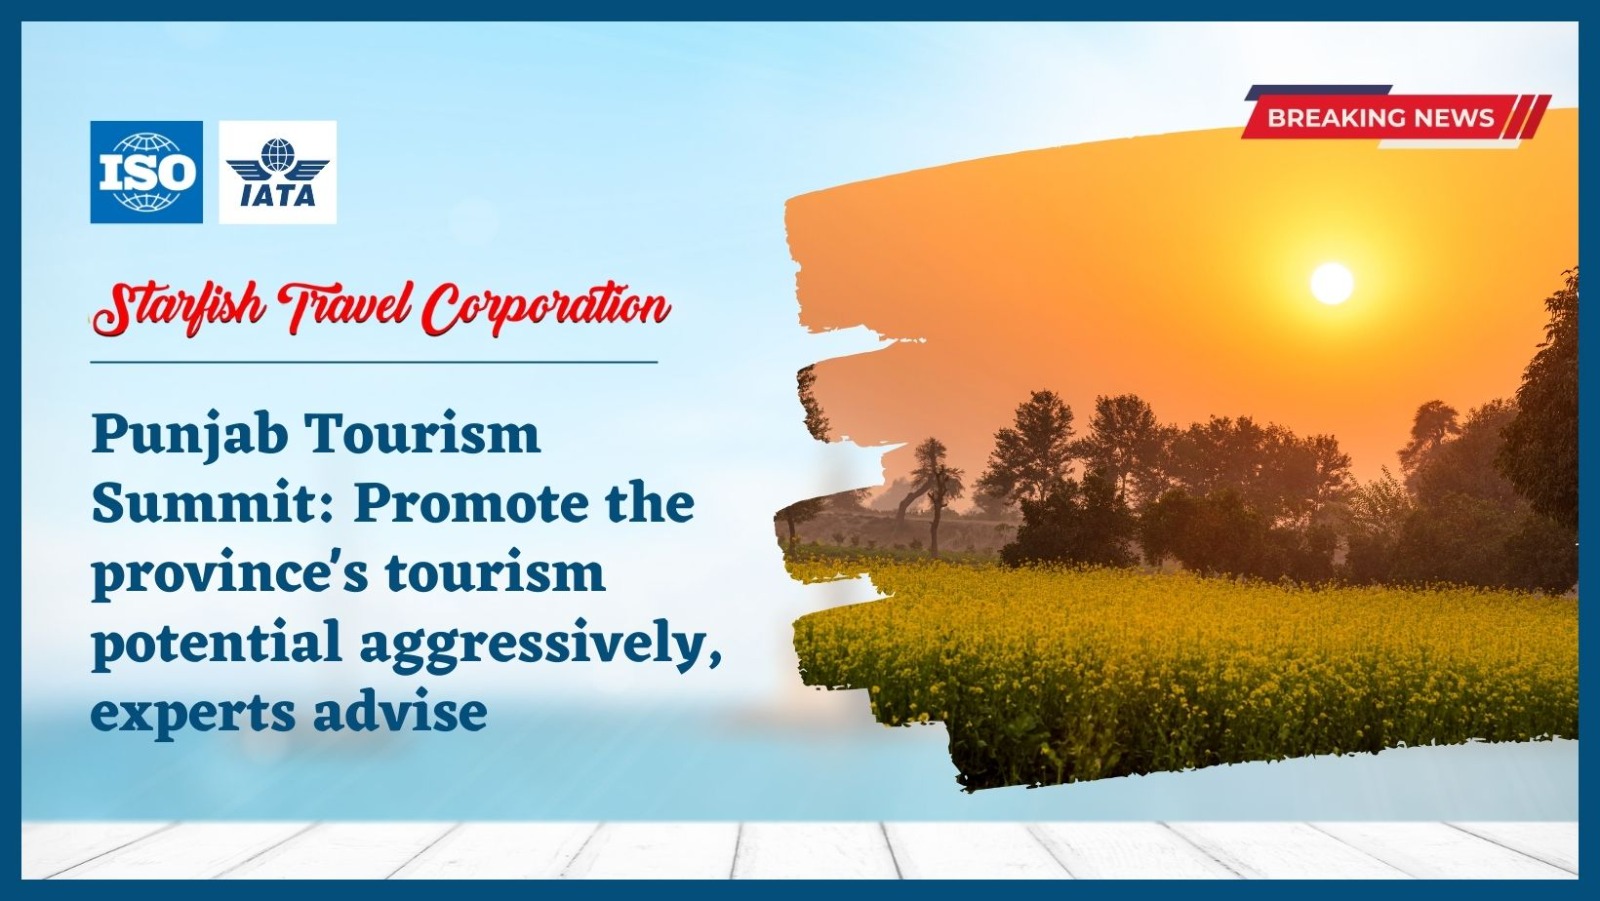 Punjab Tourism Summit: Promote the province’s tourism potential aggressively, experts advise